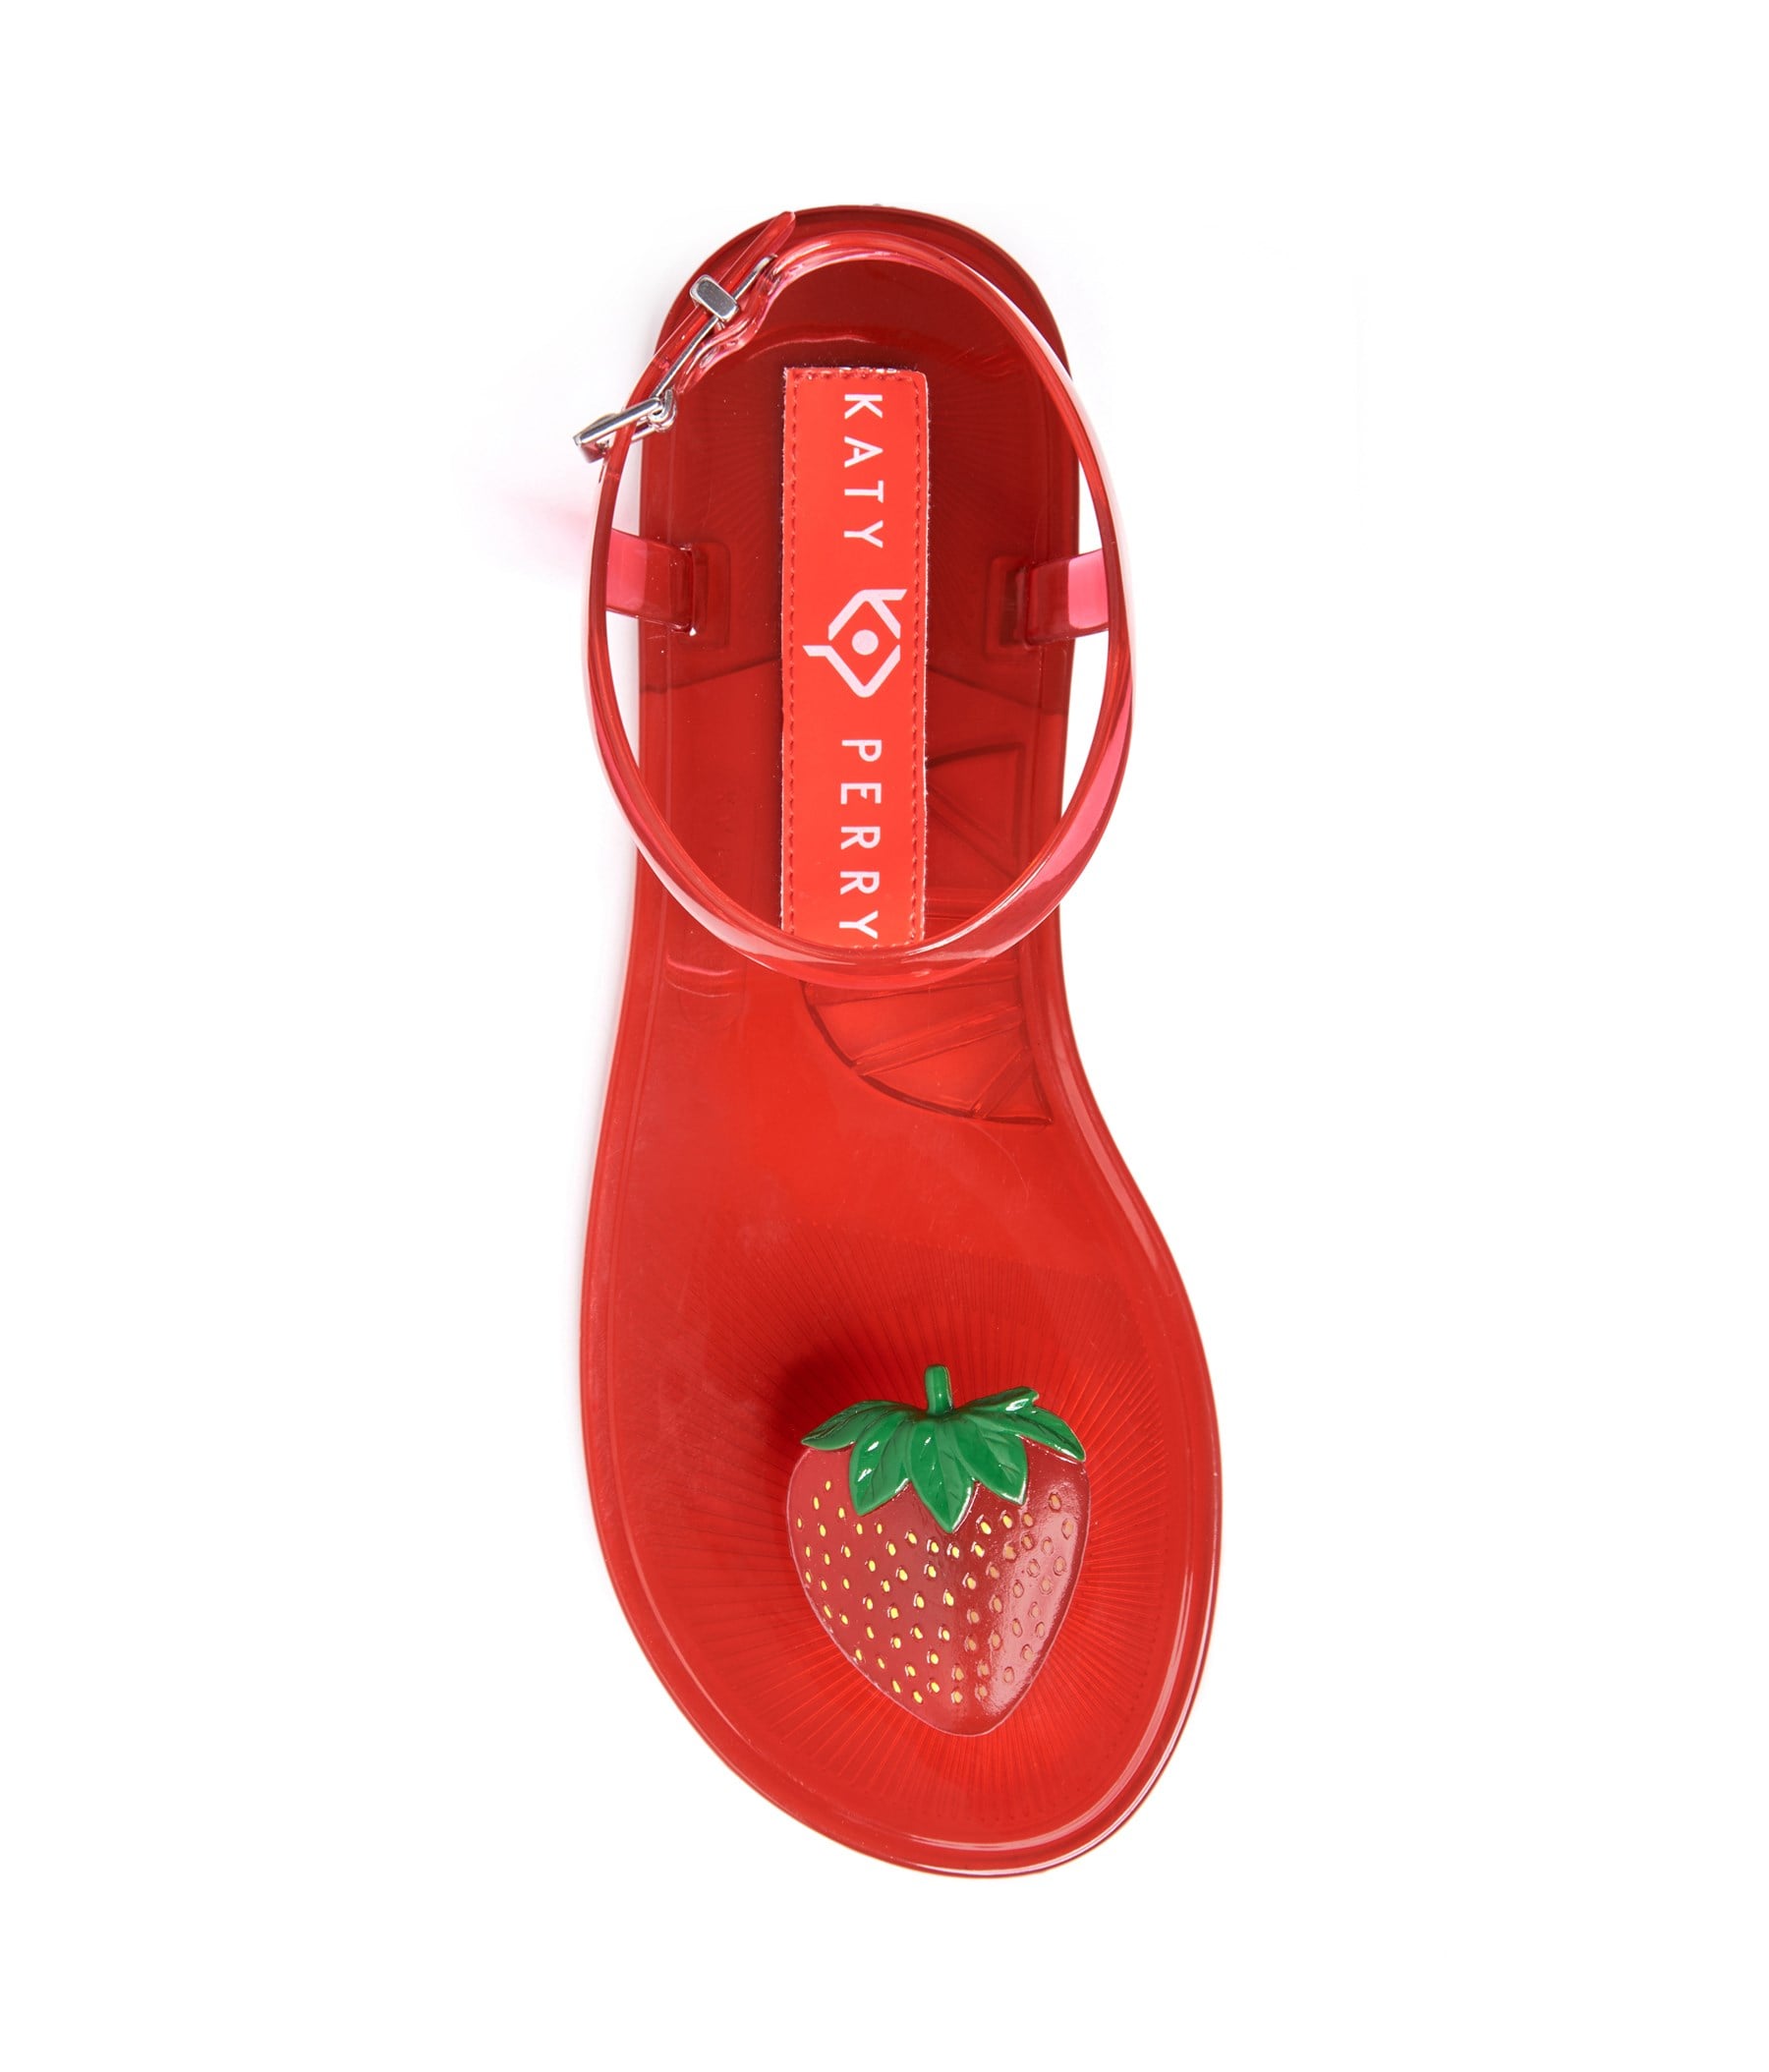 katy perry scented sandals